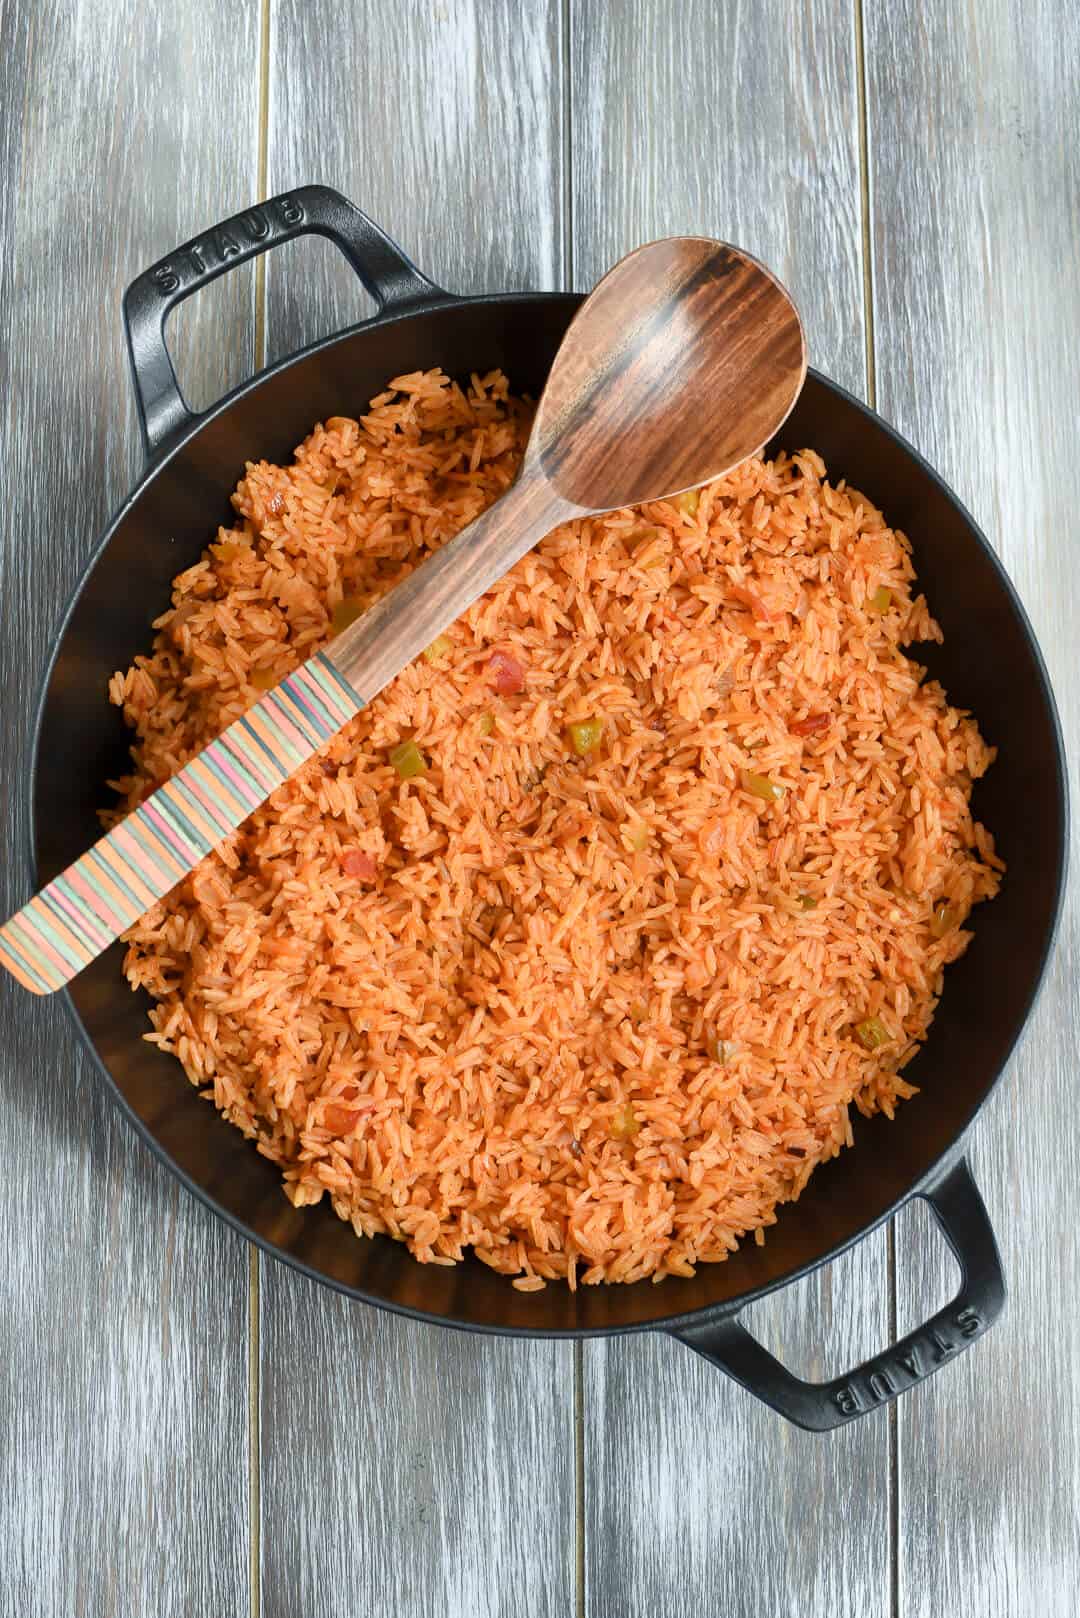 A skillet full of Salsa Rice with a wooden spoon resting over the top.